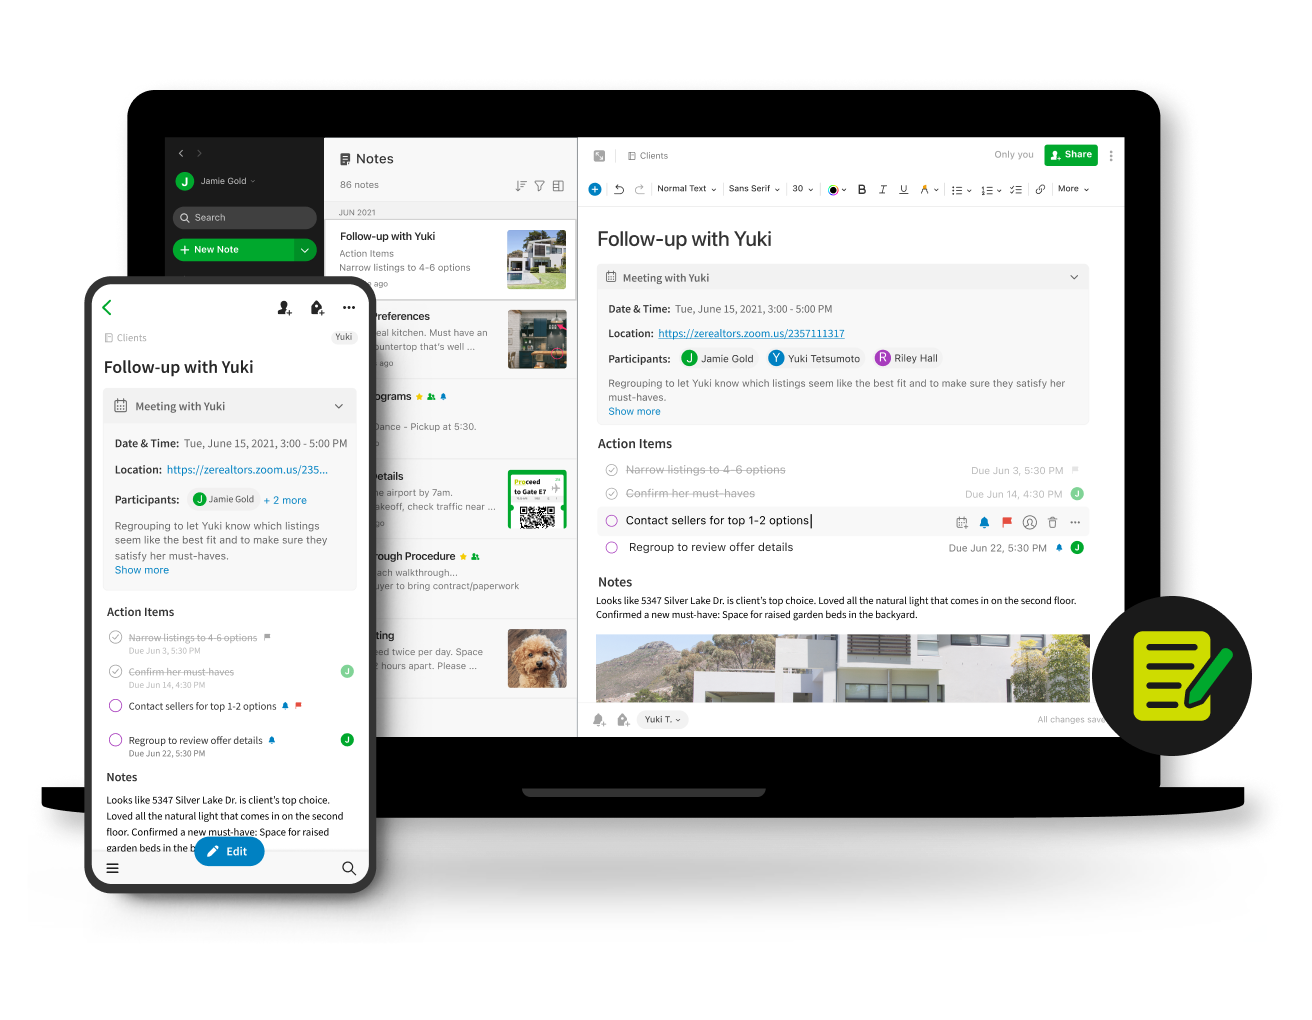 Evernote's online note-taking app